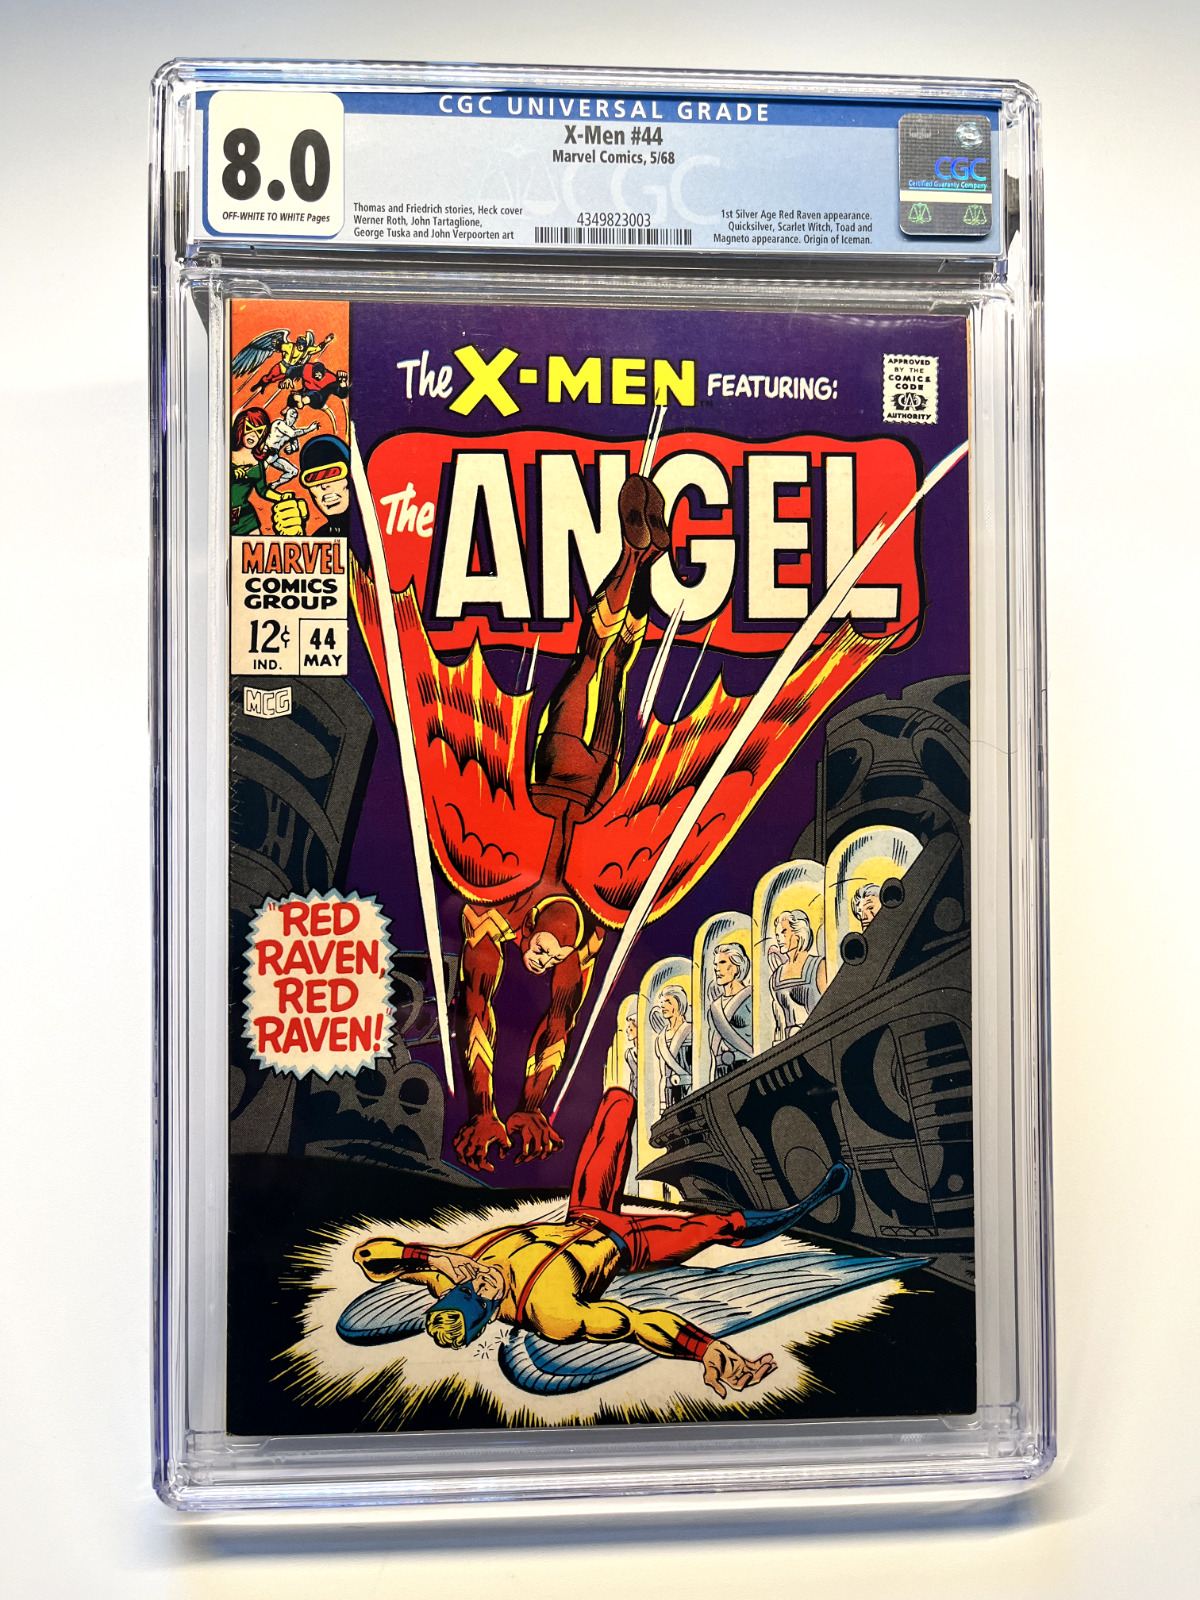 X-Men #44 CGC 8.0 (1968 Silver Age Marvel Comics) 1st Red Raven Appearance